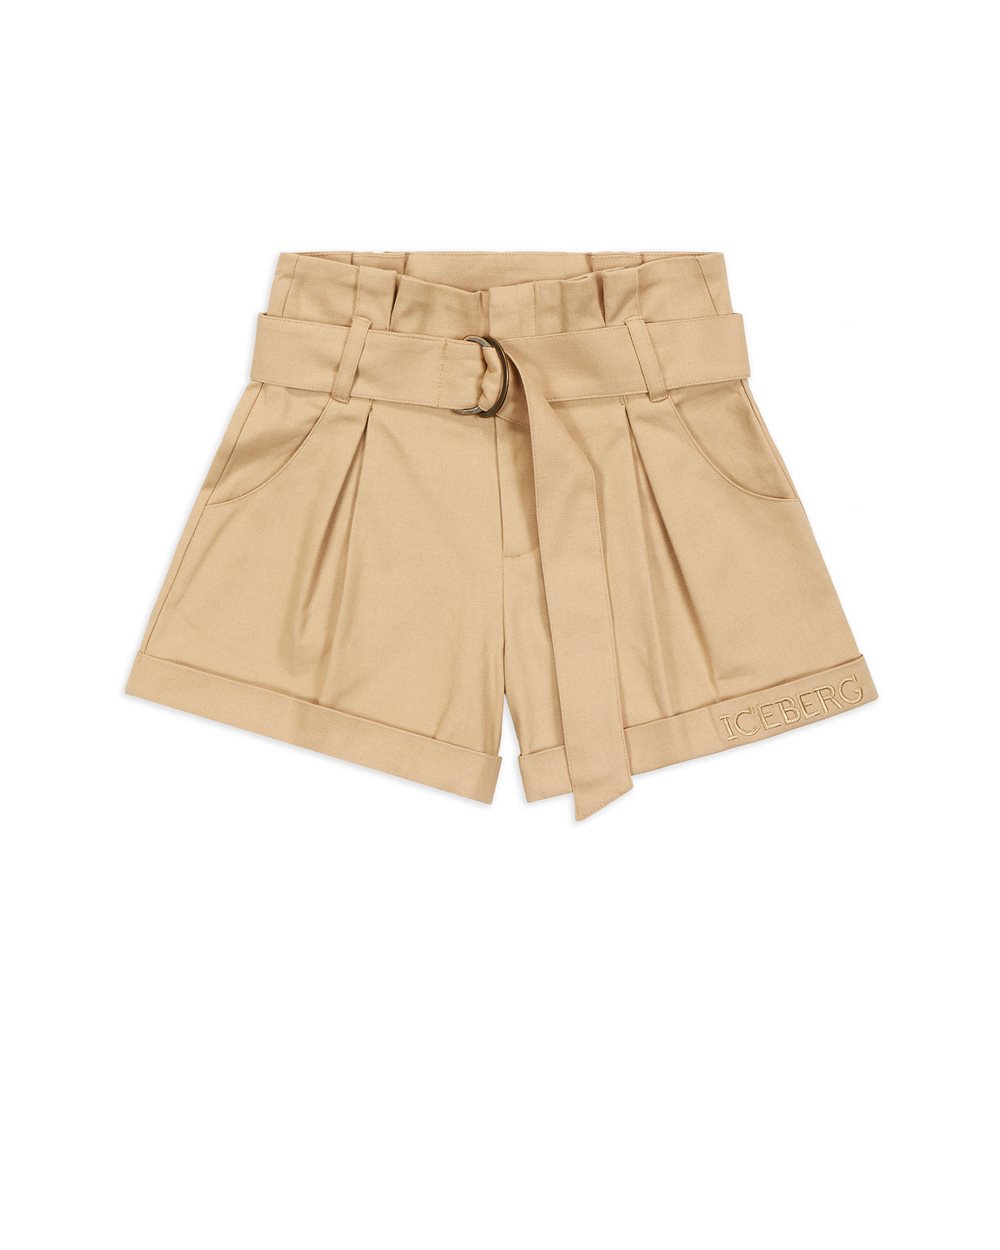 Shorts with belt and logo - Kids | Iceberg - Official Website